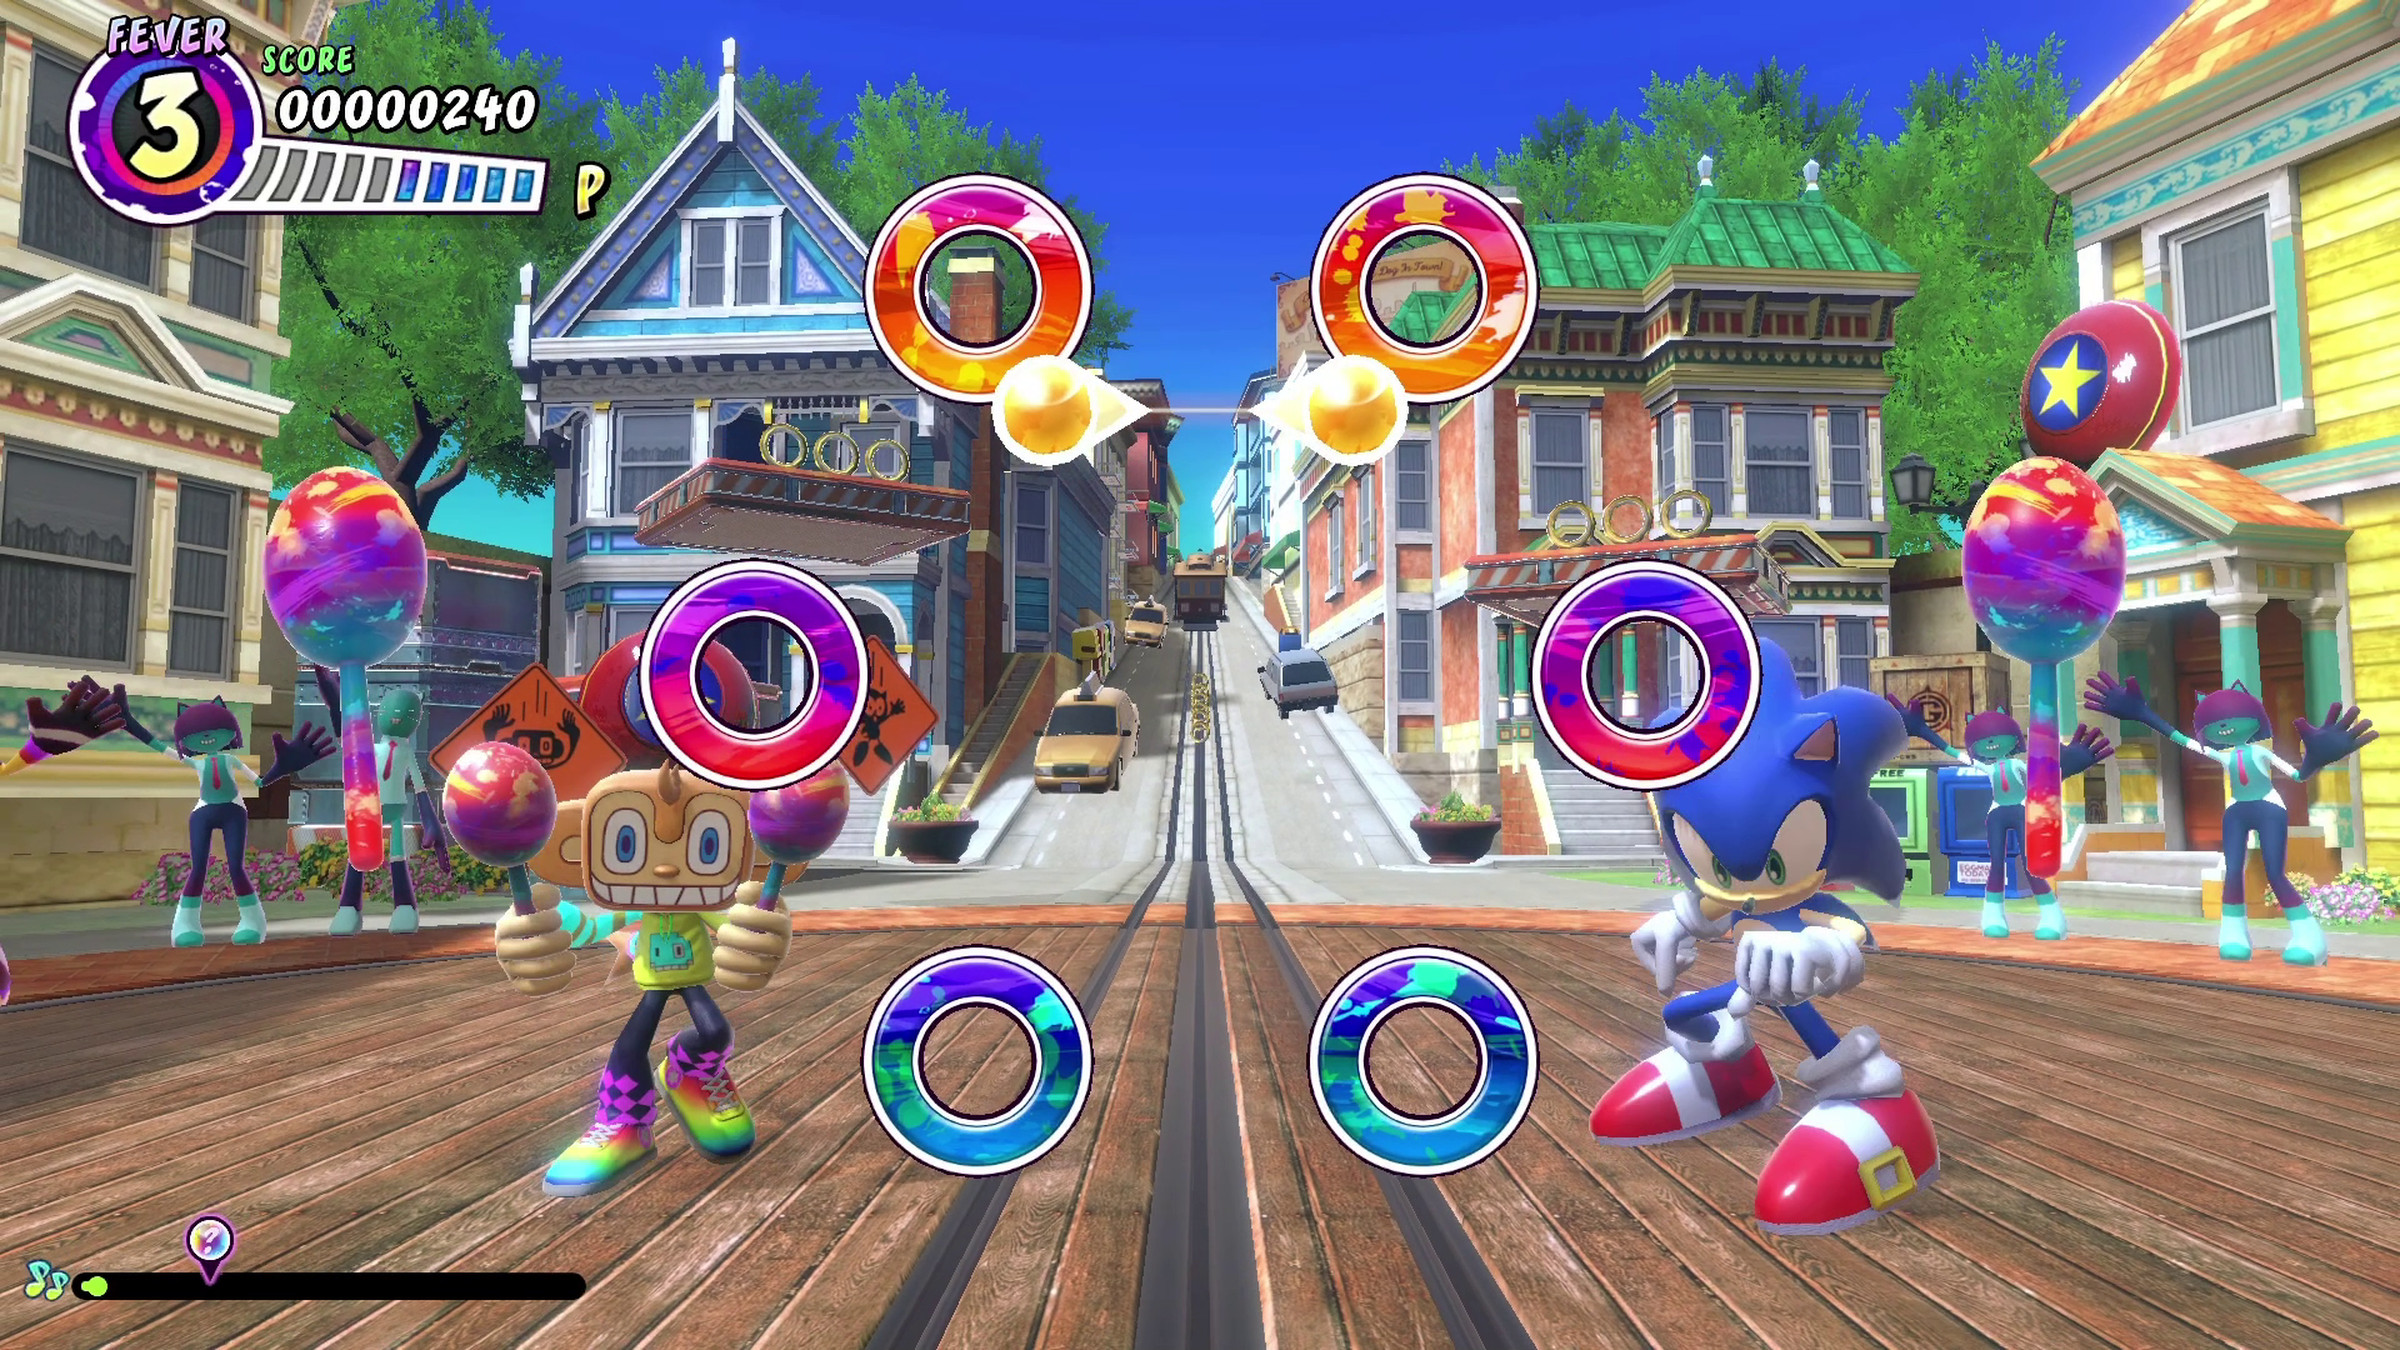 There’s a lot of Sonic in this game, including songs, costumes, maracas, sound effects, and a stage where you dance alongside Sega’s blue hero.